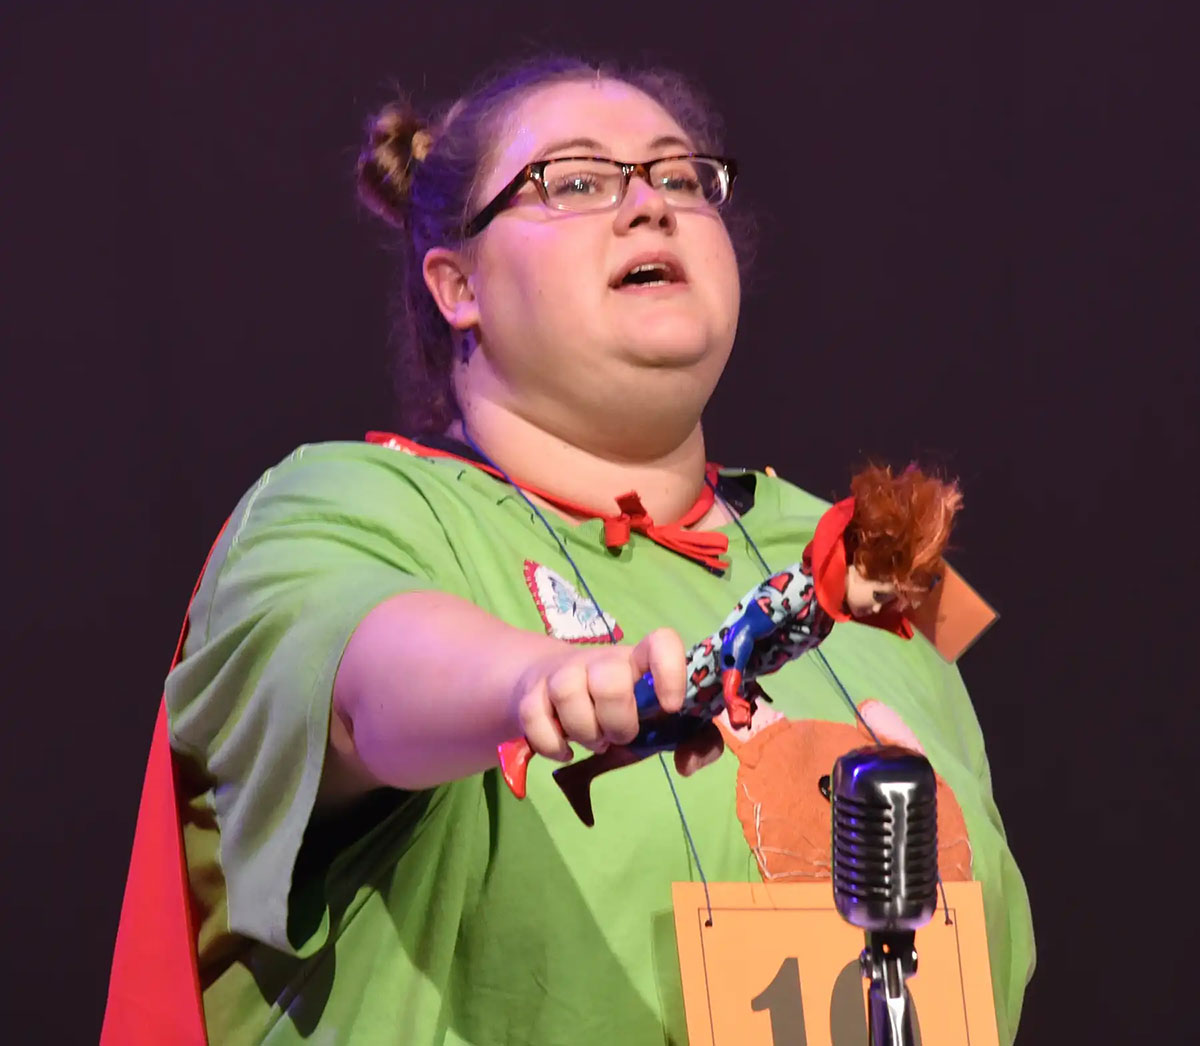 Sydney McKinley Benoit plays Leaf Coneybear for BCP's "The 25th Annual Putnam County Spelling Bee" through March 12. Courtesy photo.